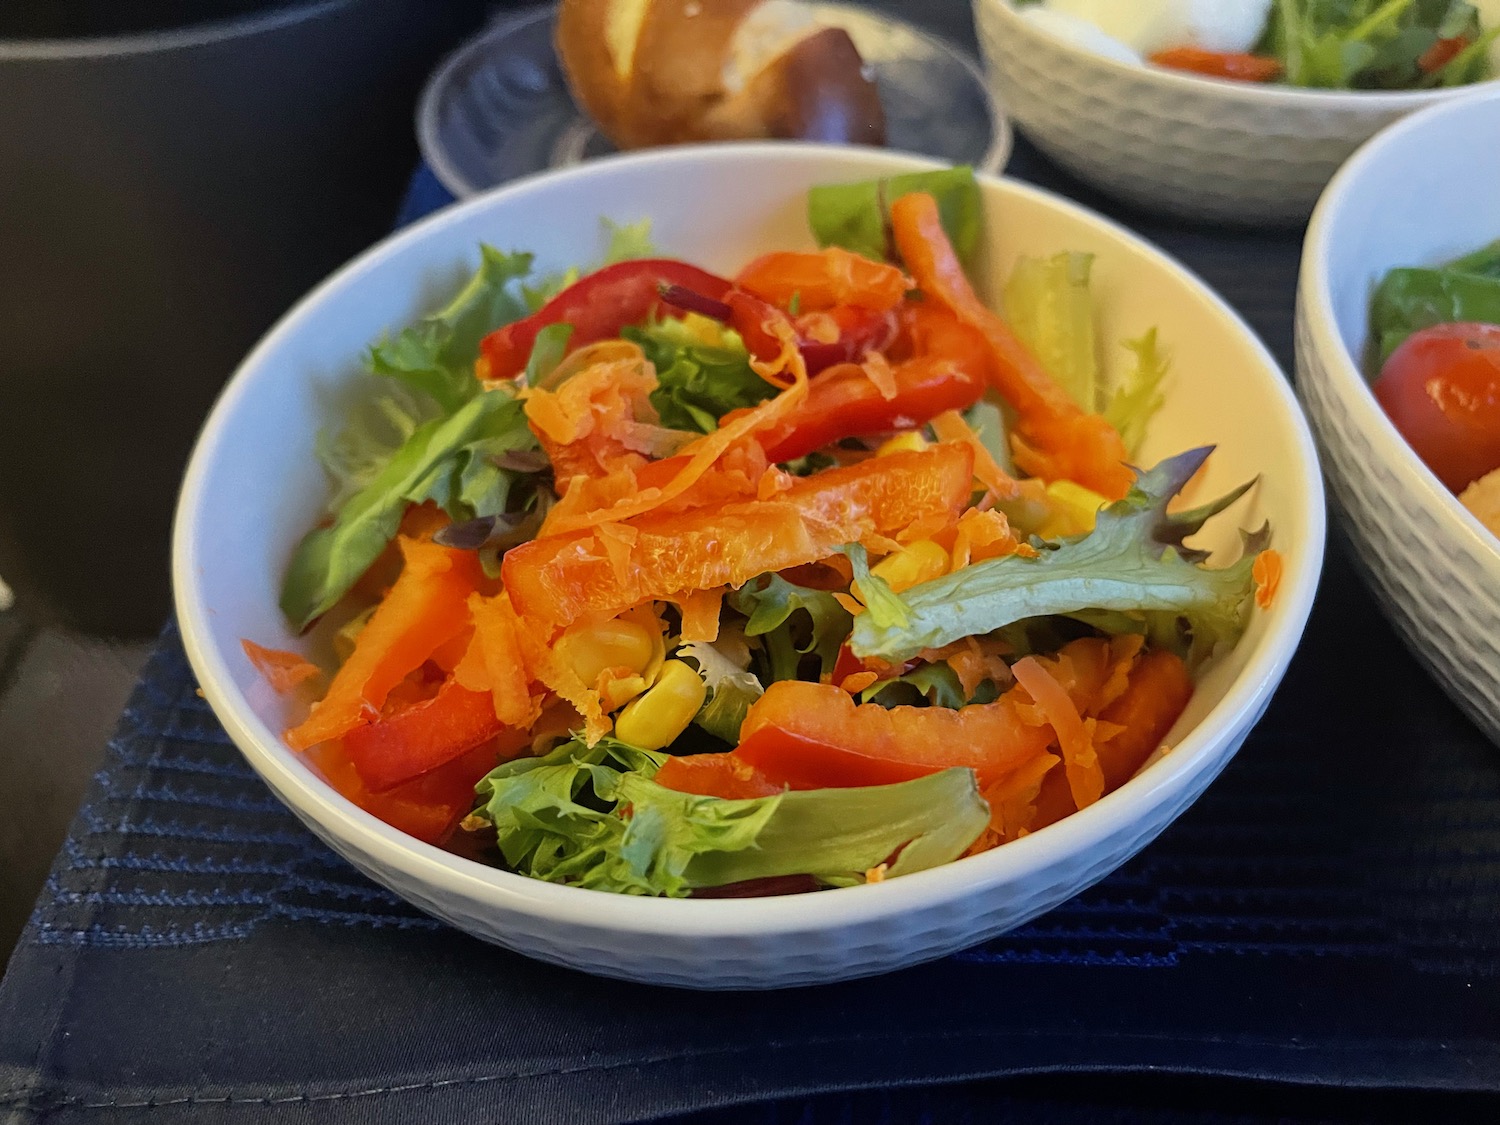 a bowl of salad with carrots and corn